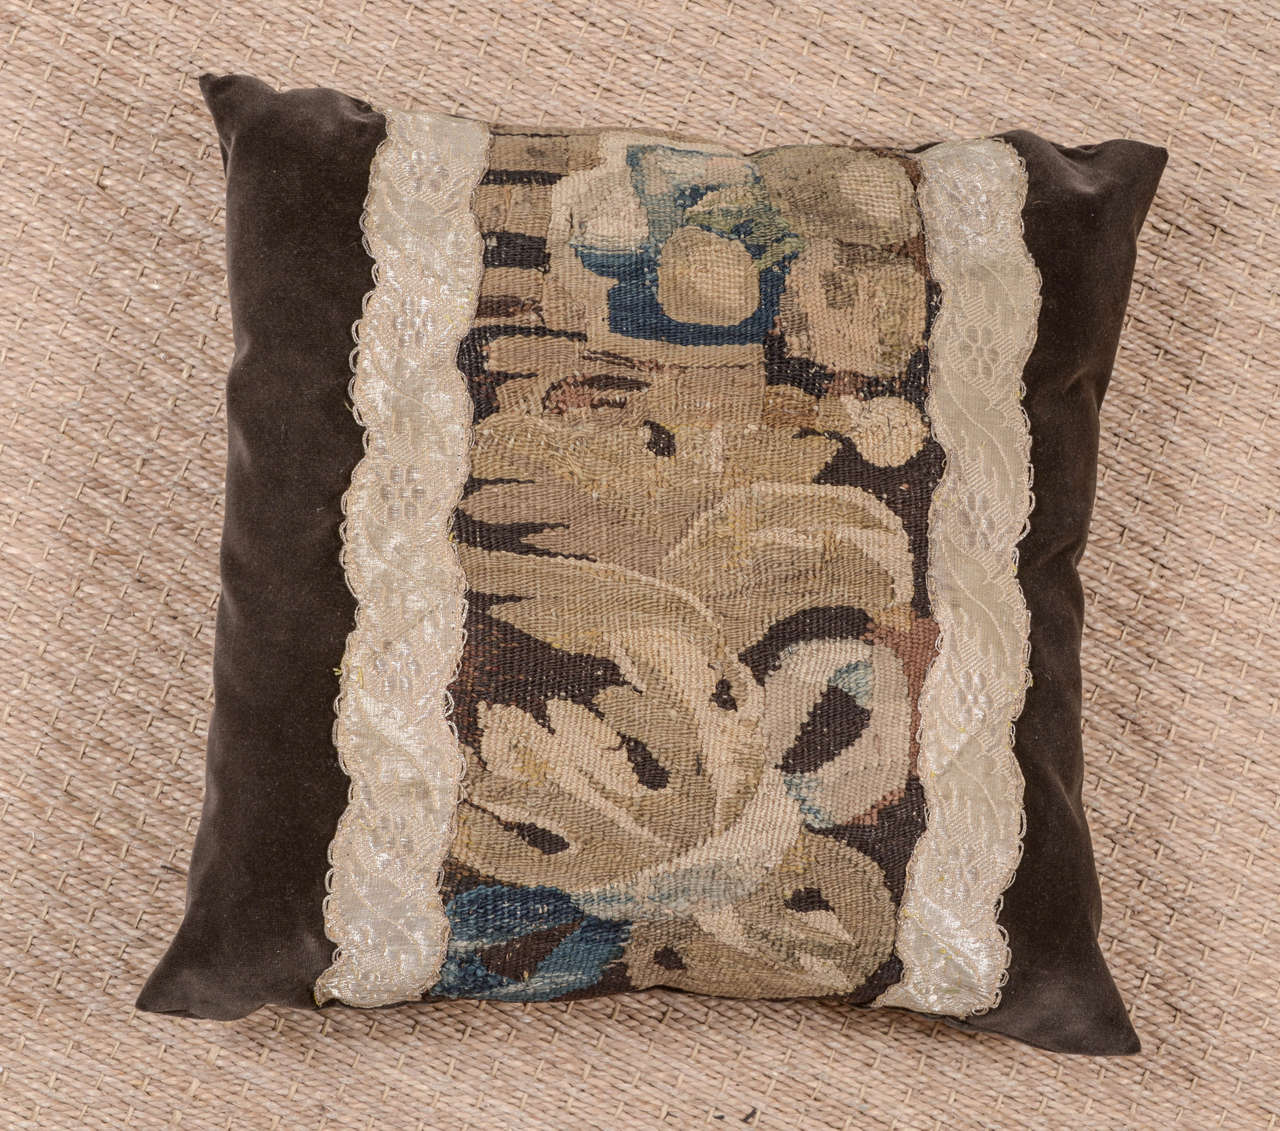 18th century tapestry fragment pillow constructed in 100% cotton velvet in rich chocolate hue. Tapestry is framed with French Galon. Down filled.